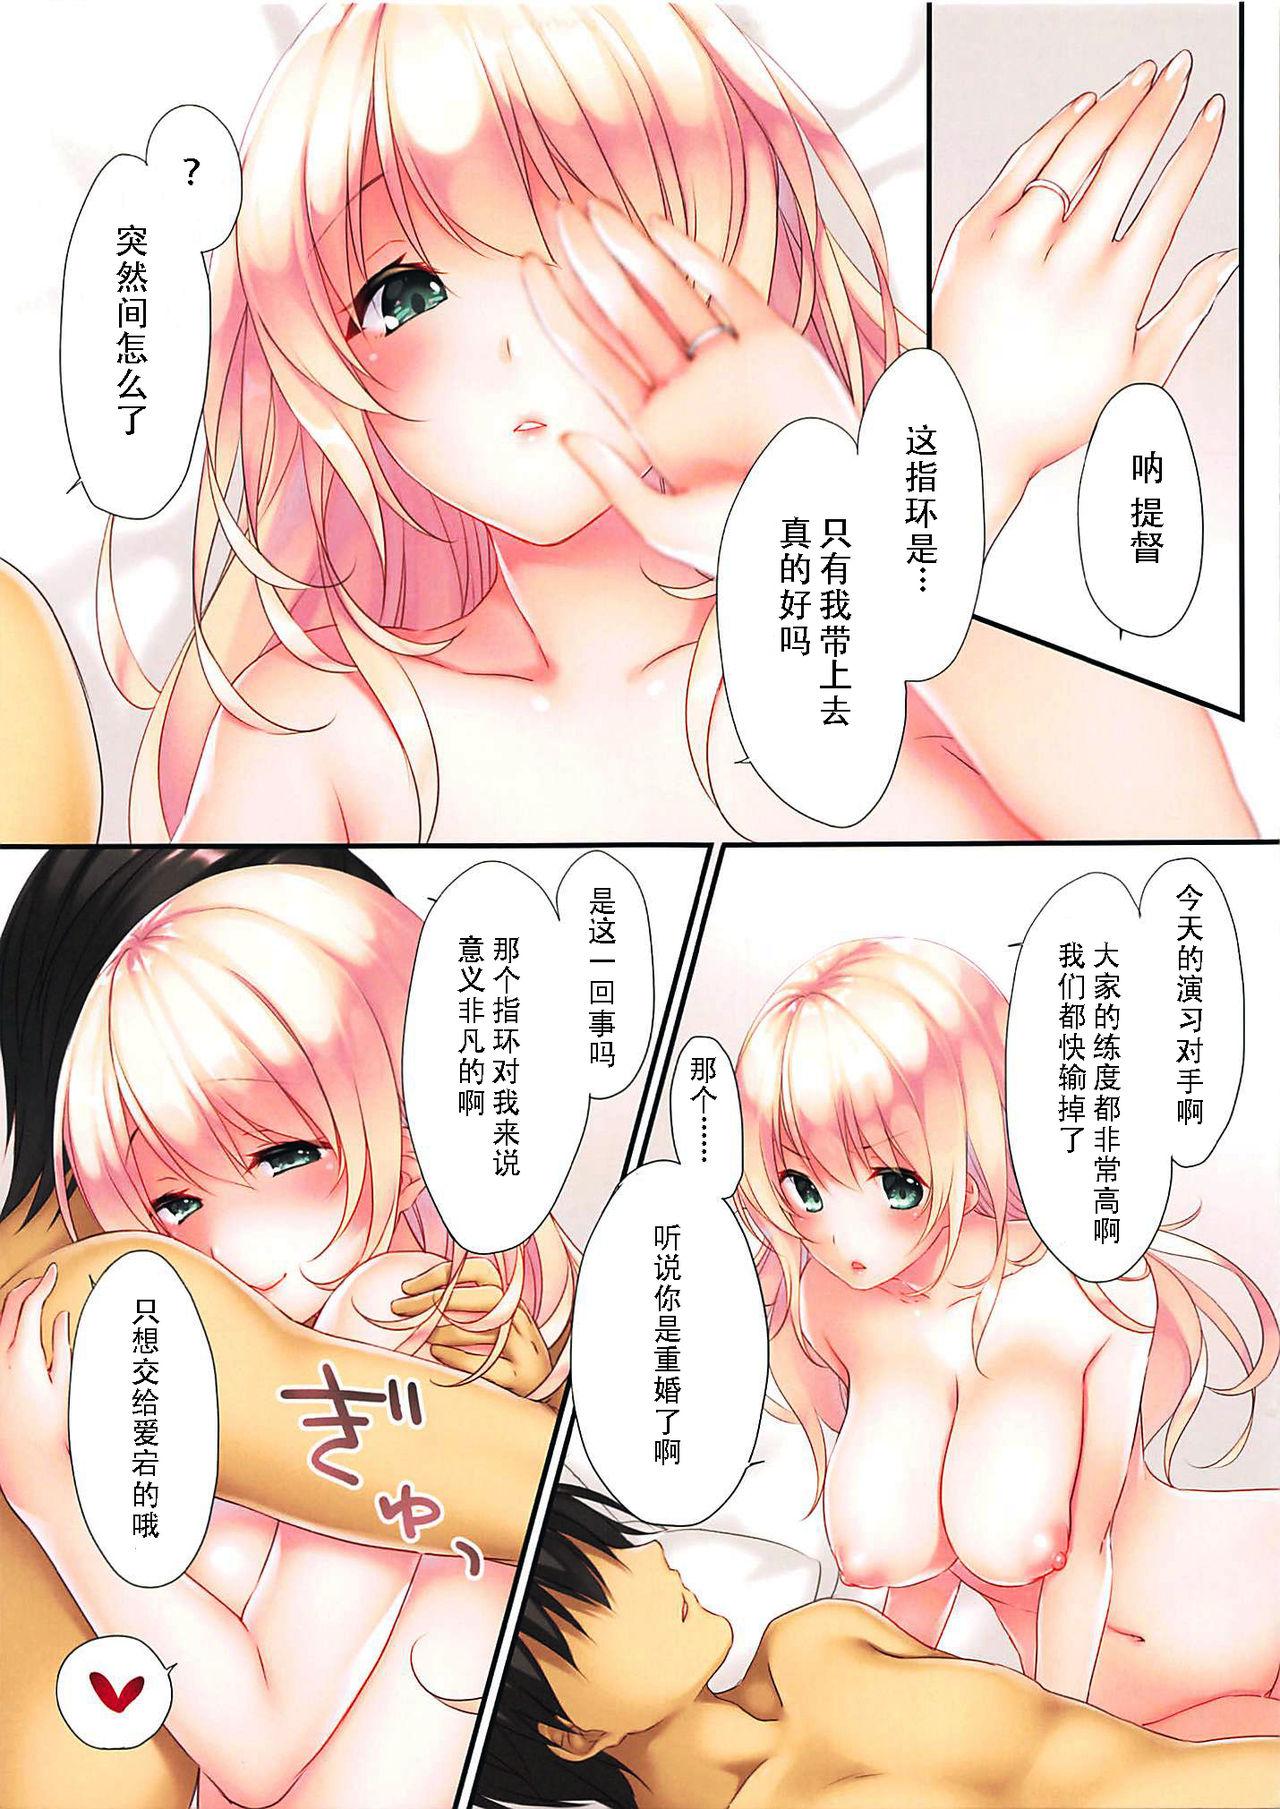 Blowjob Porn LOVE MARRIAGE - Kantai collection Indonesian - Page 4